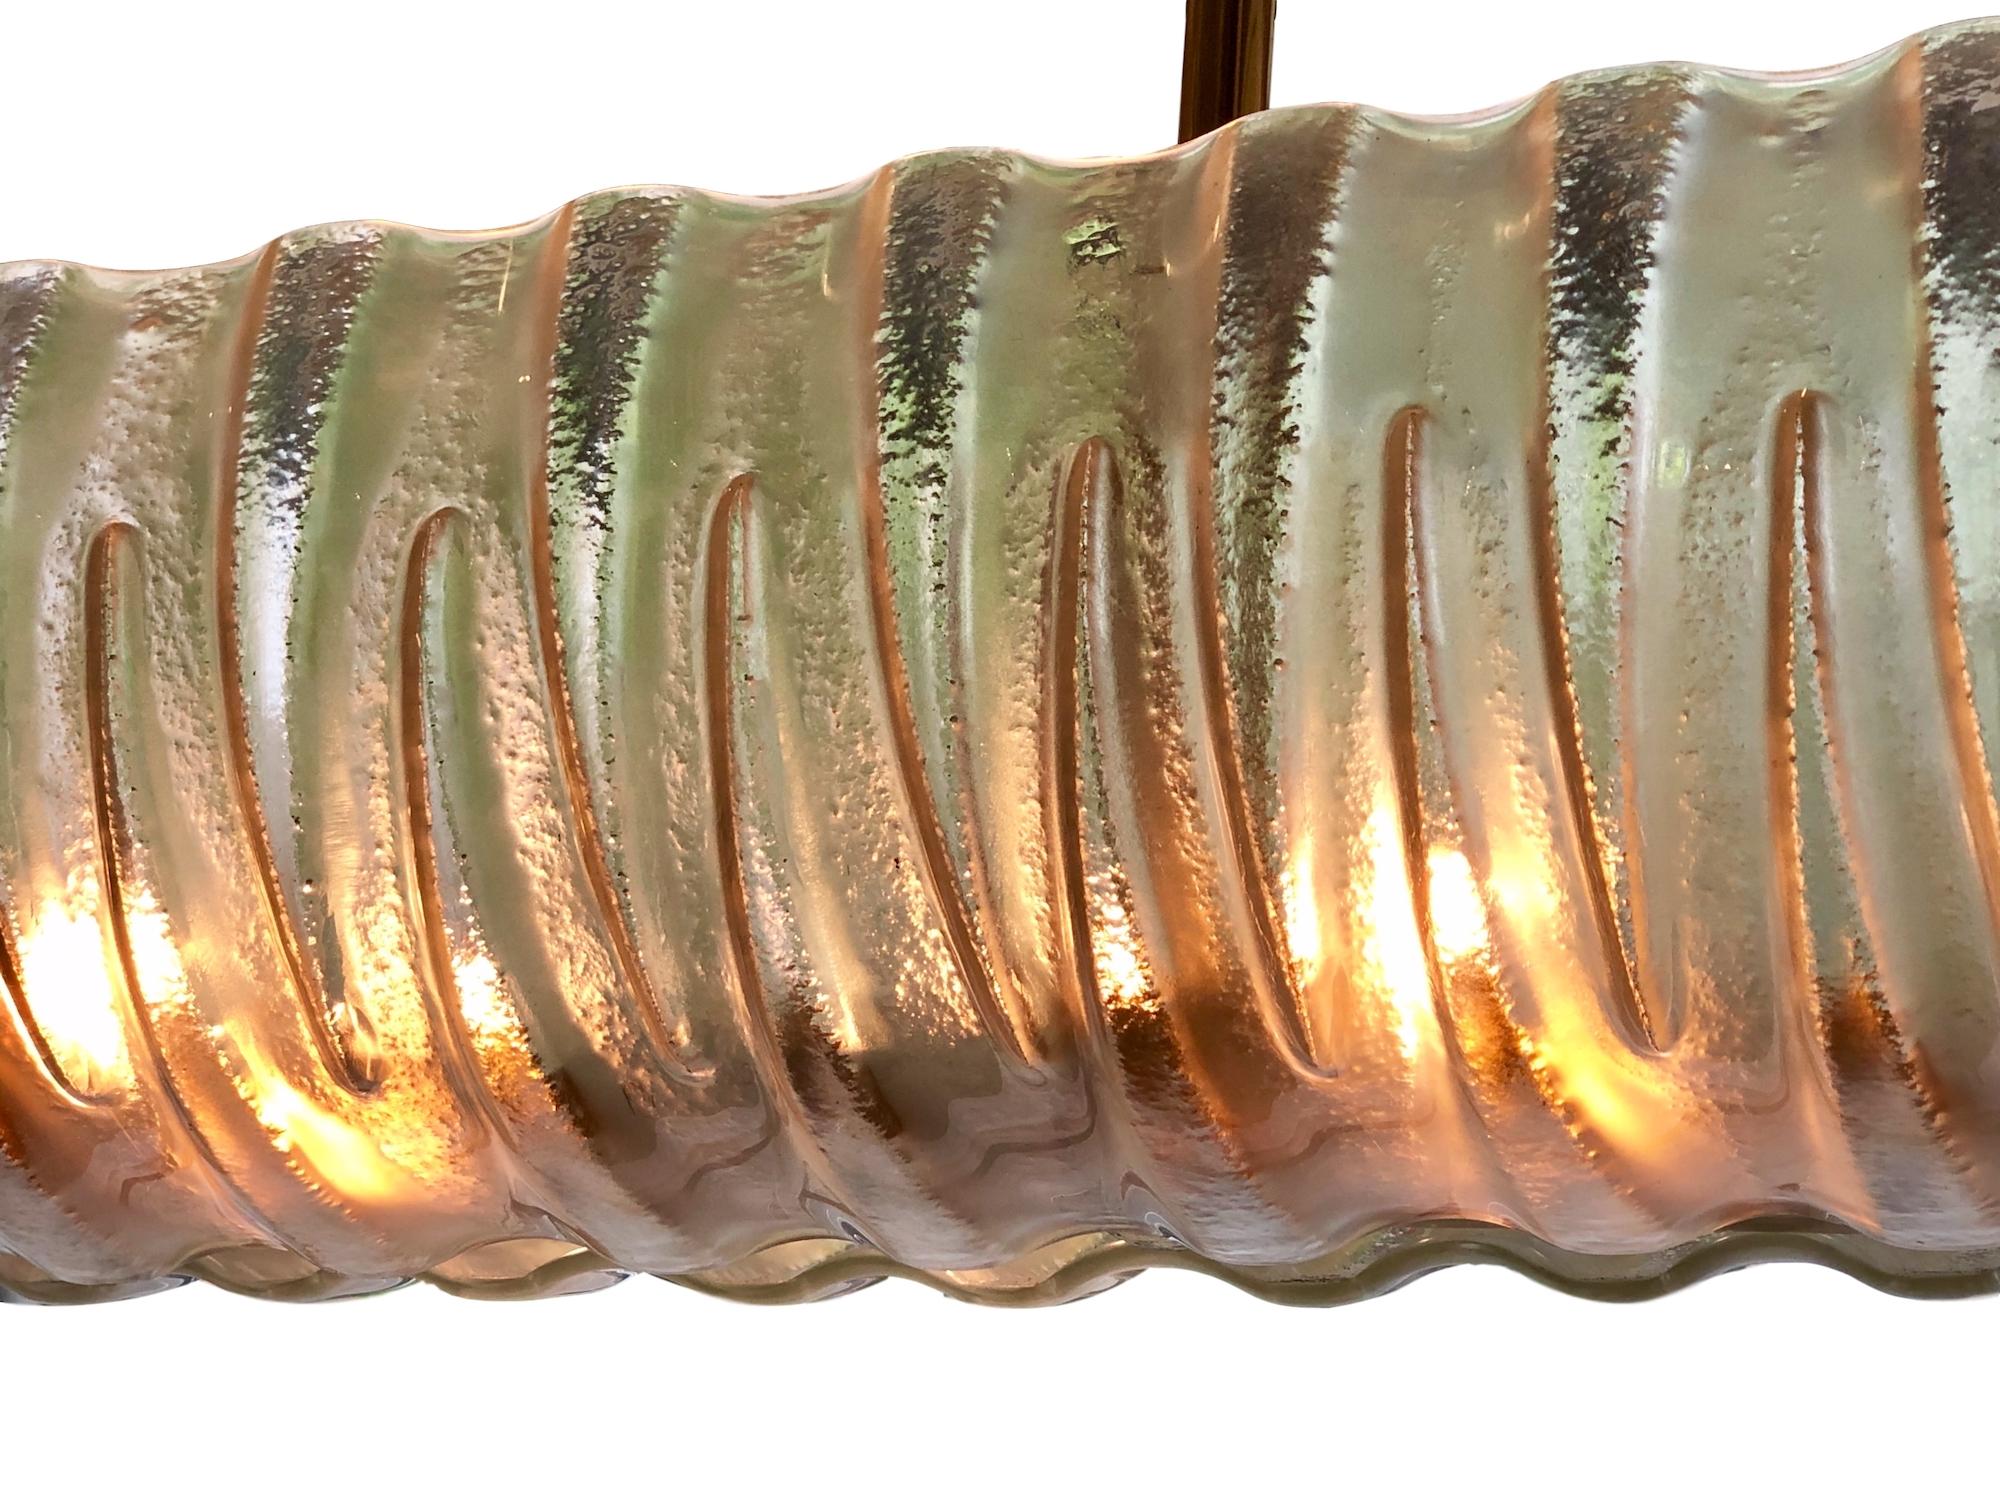 A circa 1960's Italian molded glass and brass light fixture with 12 interior lights.

Measurements:
Length 62